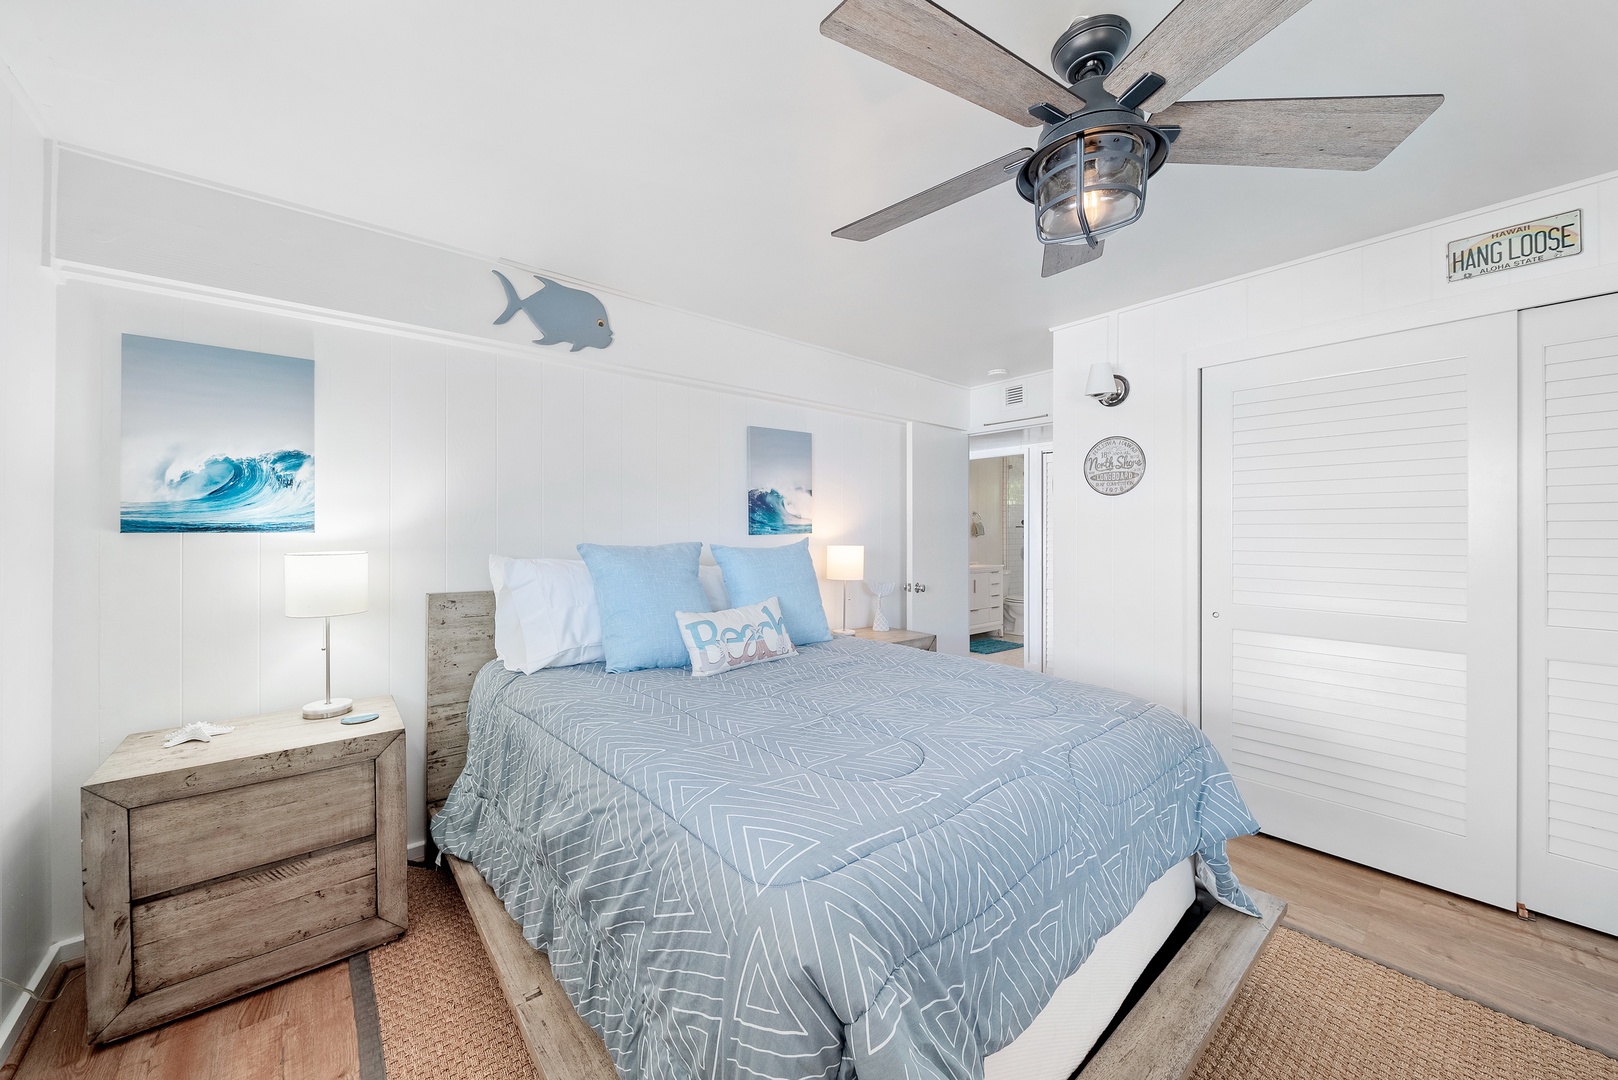 Haleiwa Vacation Rentals, Surfer's Paradise - Equipped with a ceiling fan to keep cool and comfortable overnight